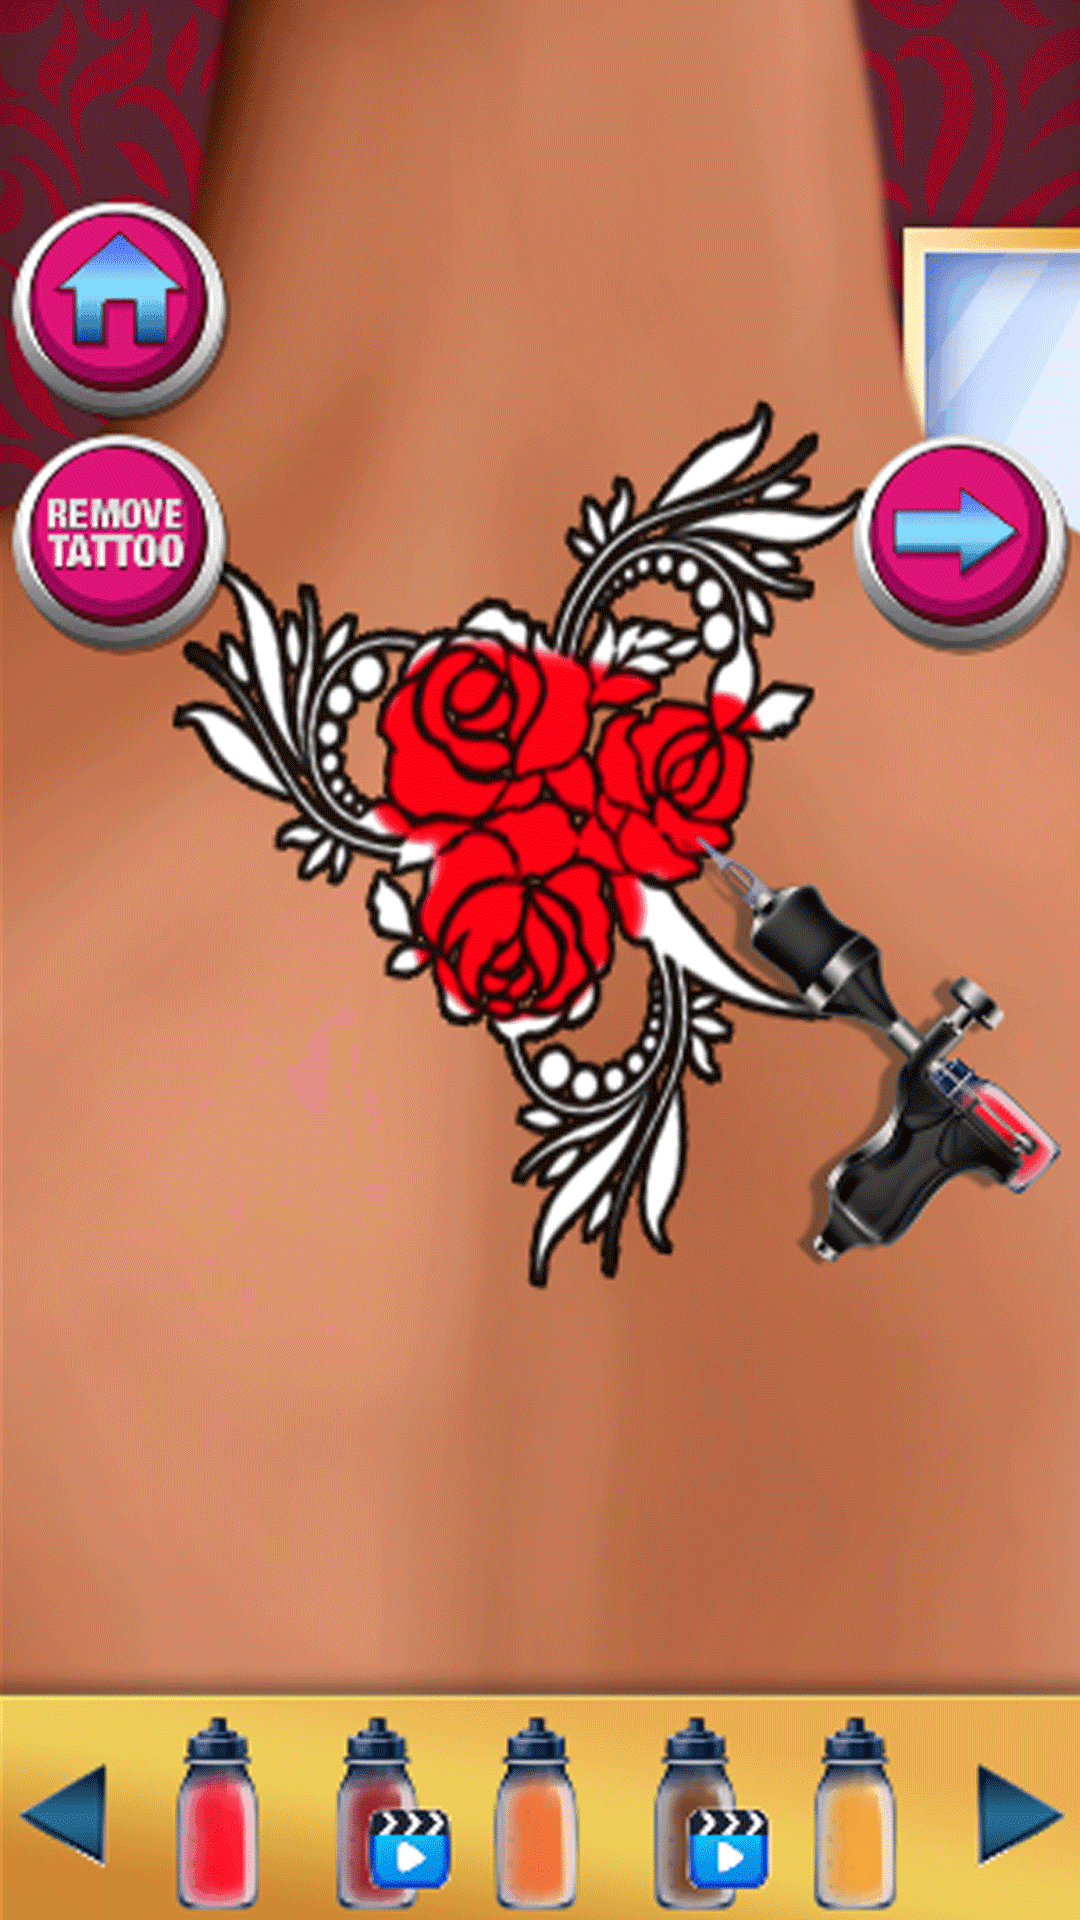 Learn About the Latest Tattoo Design Apps in the Market